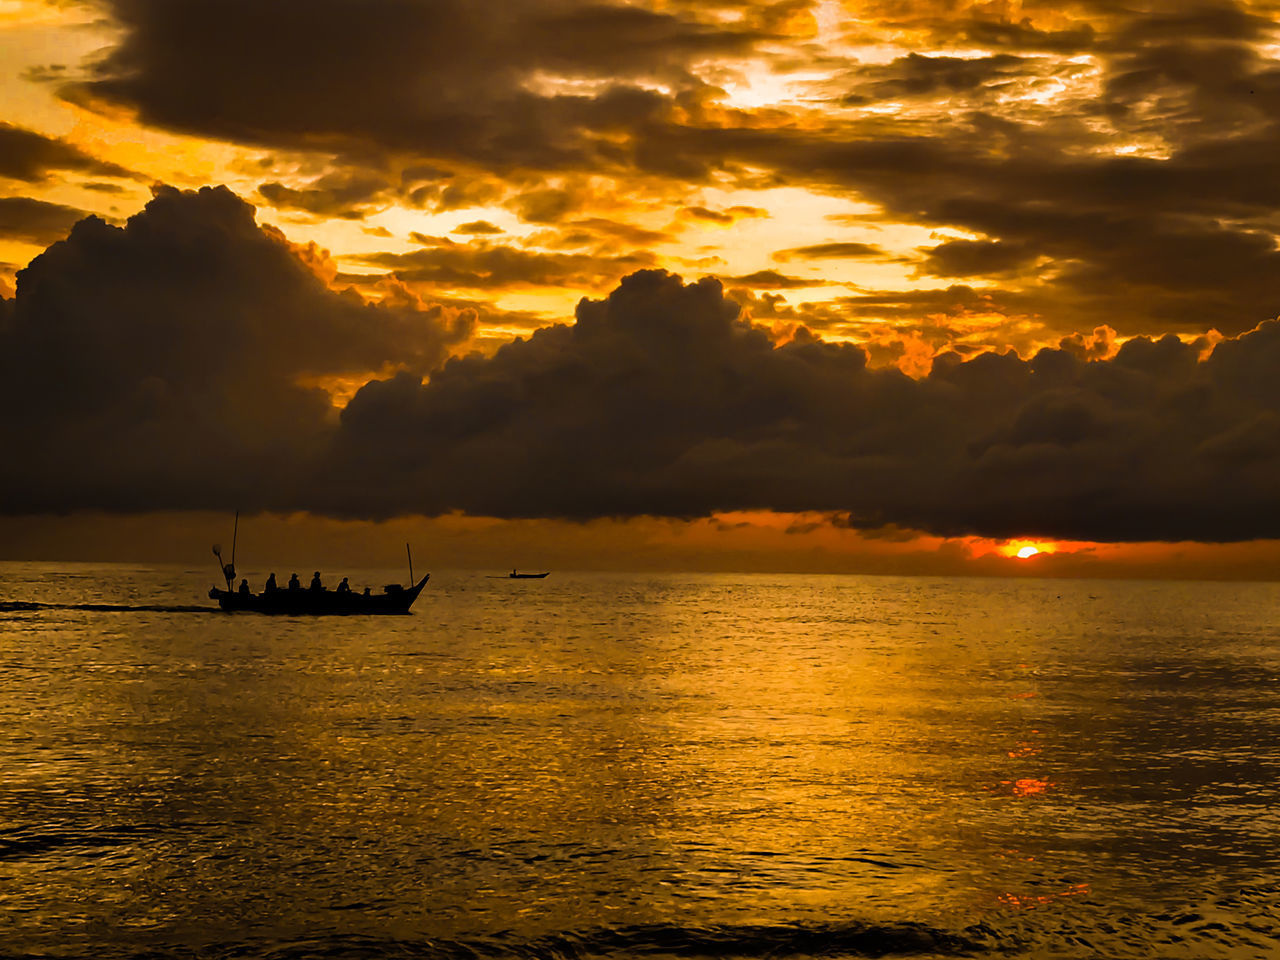 SILHOUETTE FISHING BOAT IN SEA AGAINST SKY DURING SUNSET